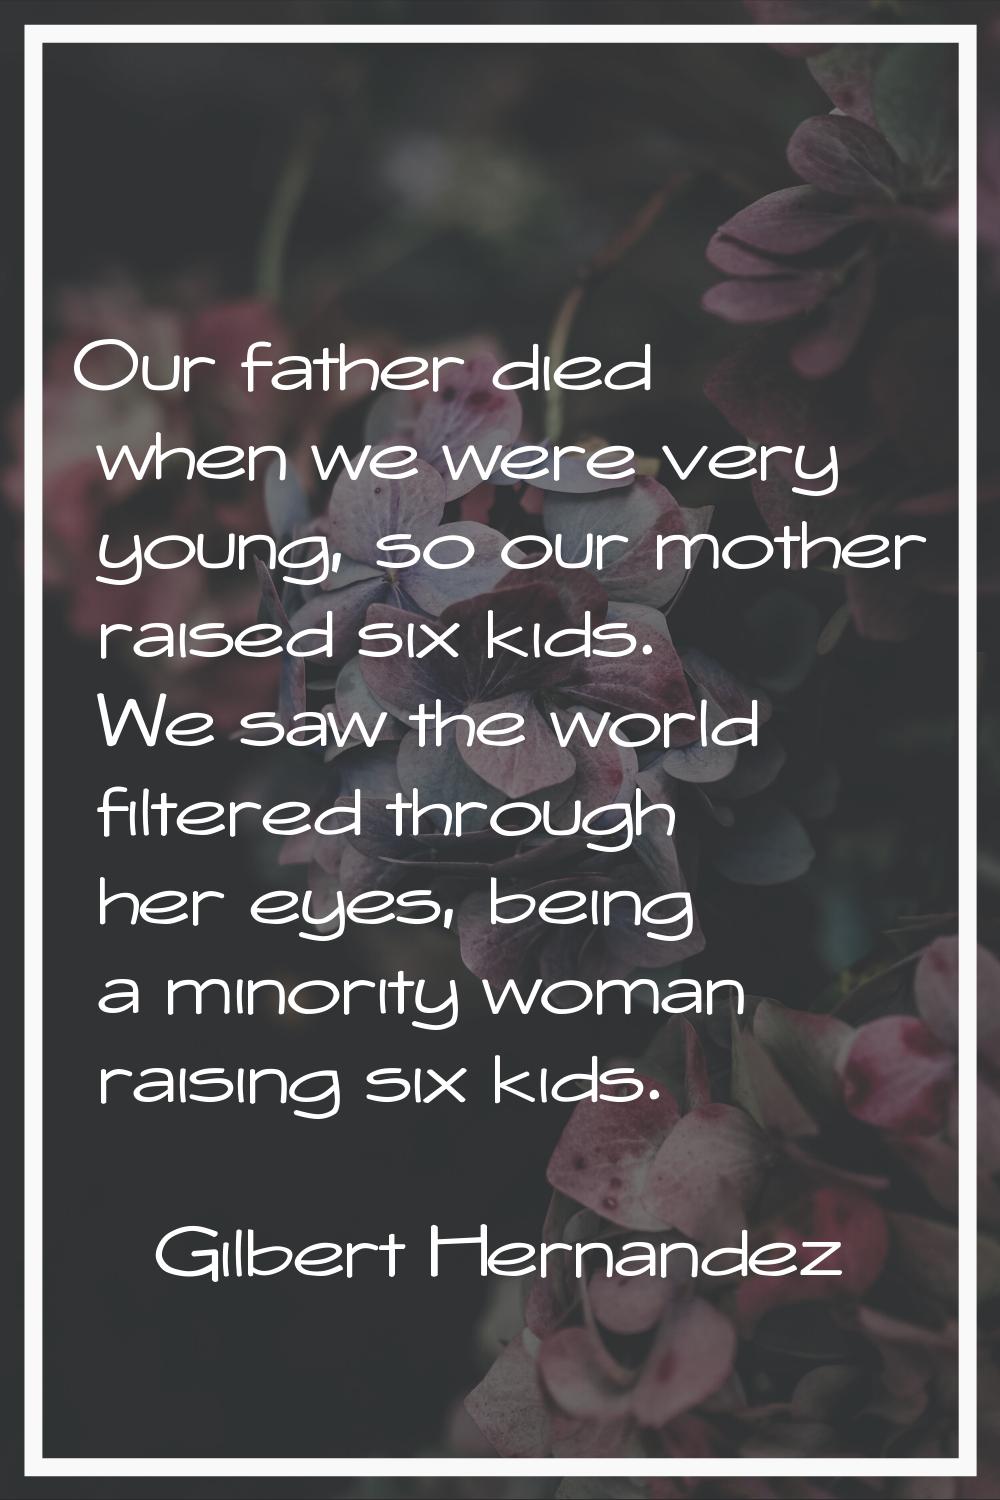 Our father died when we were very young, so our mother raised six kids. We saw the world filtered t